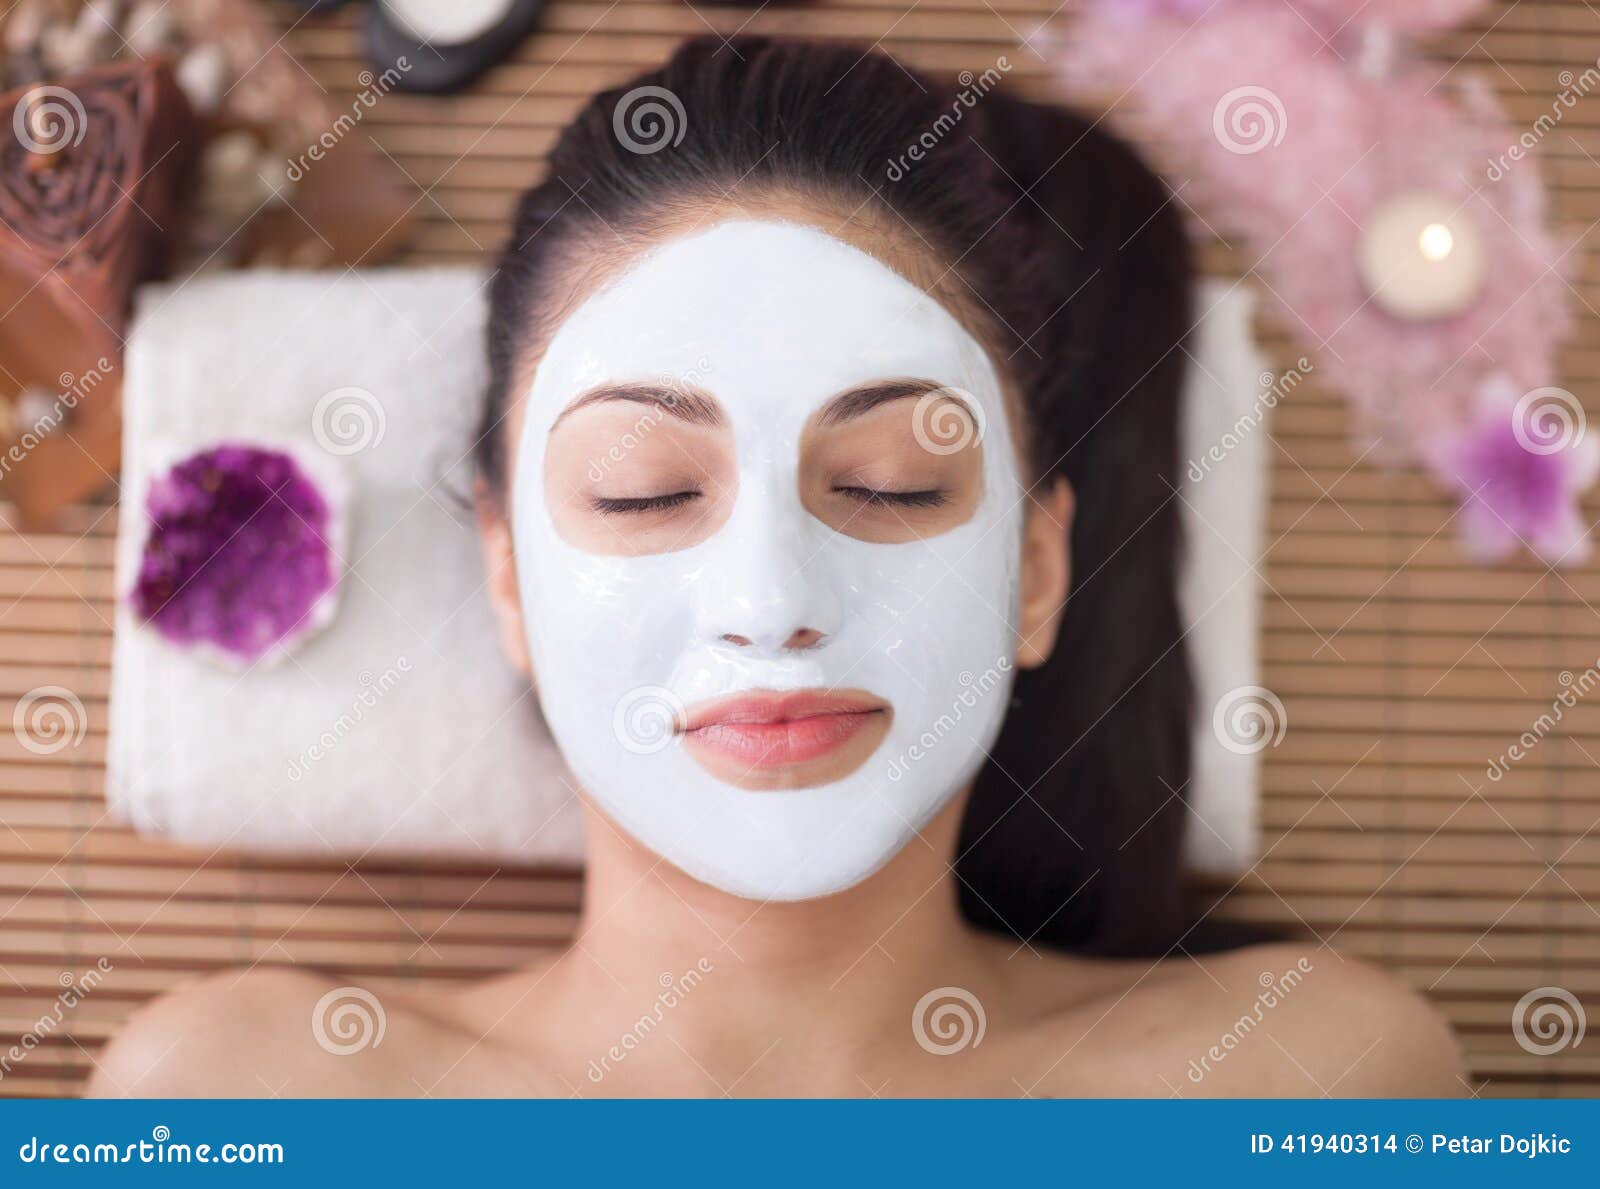 Spa Therapy for Young Woman Having Facial Mask at Beauty Salon Stock ...